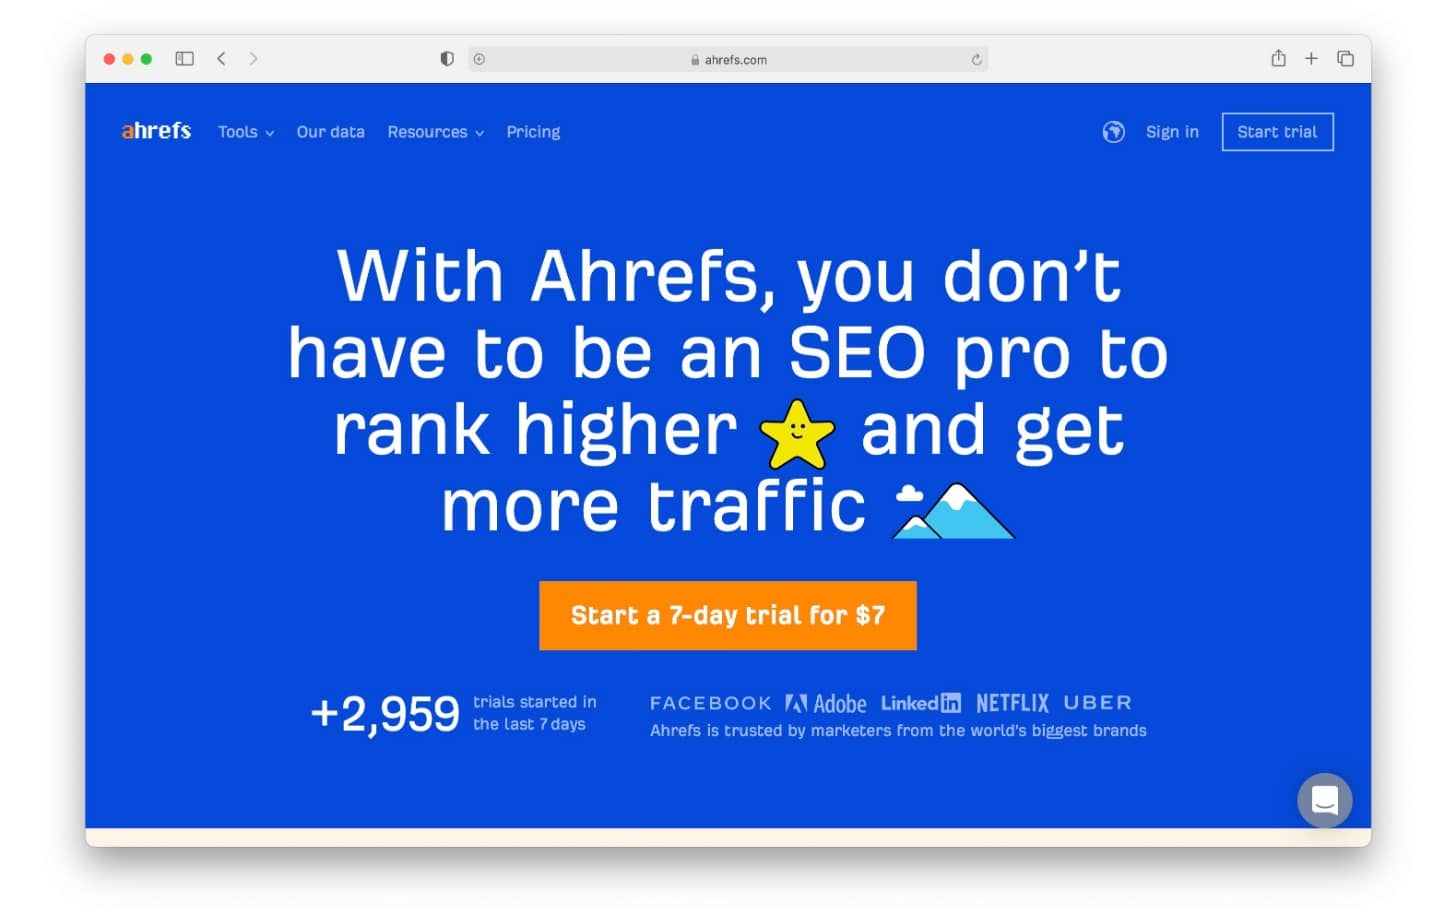 Ahrefs is one of the most powerful SEO tools on the market